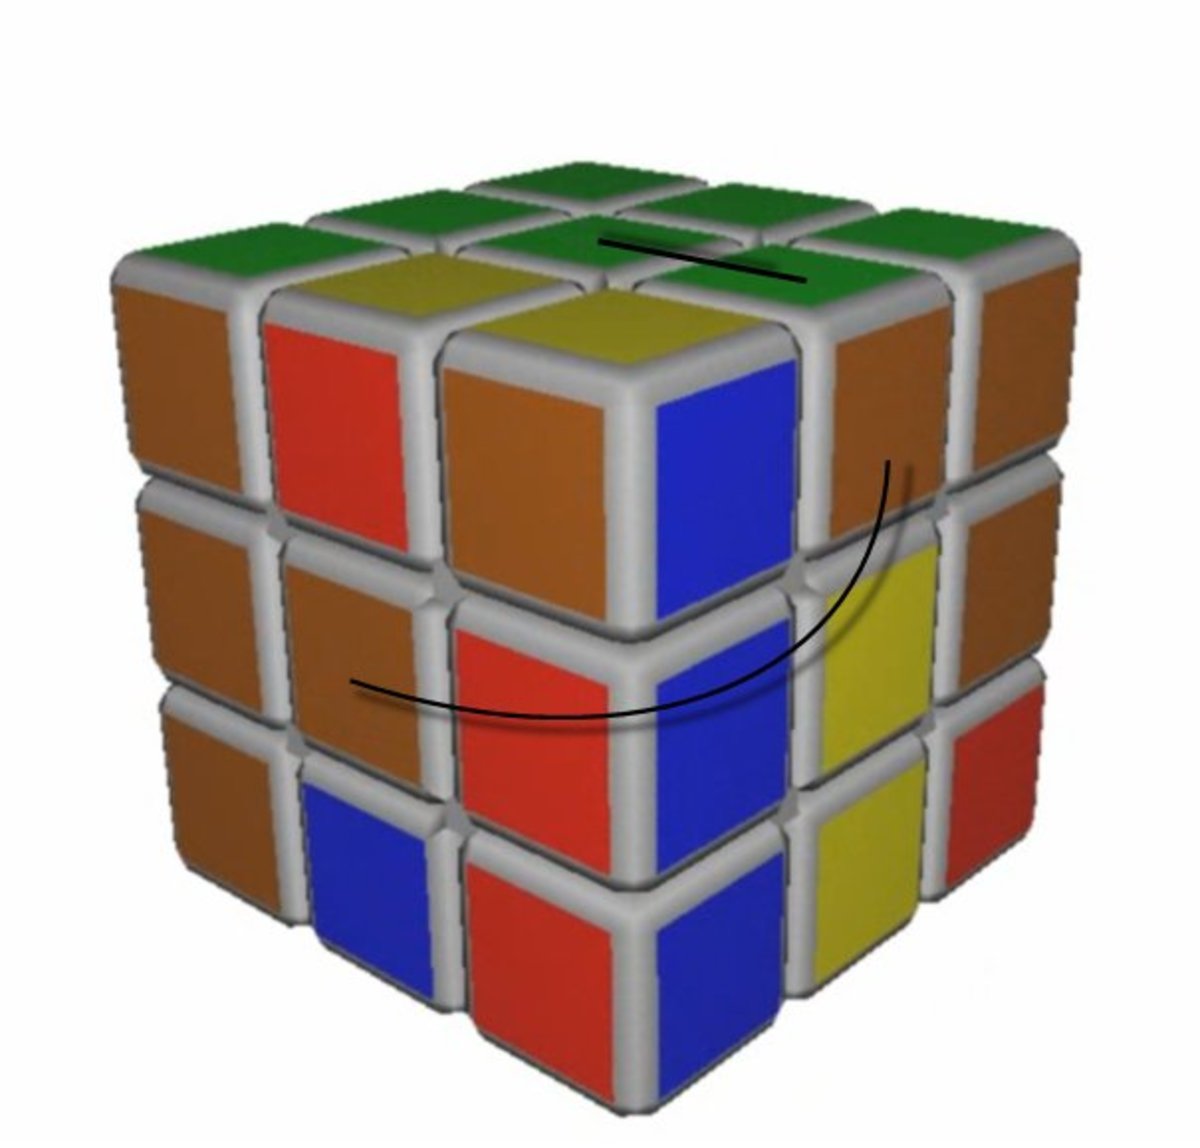 The Easiest Way to Solve a Rubik's Cube, With Step-by-Step Pictures & Video